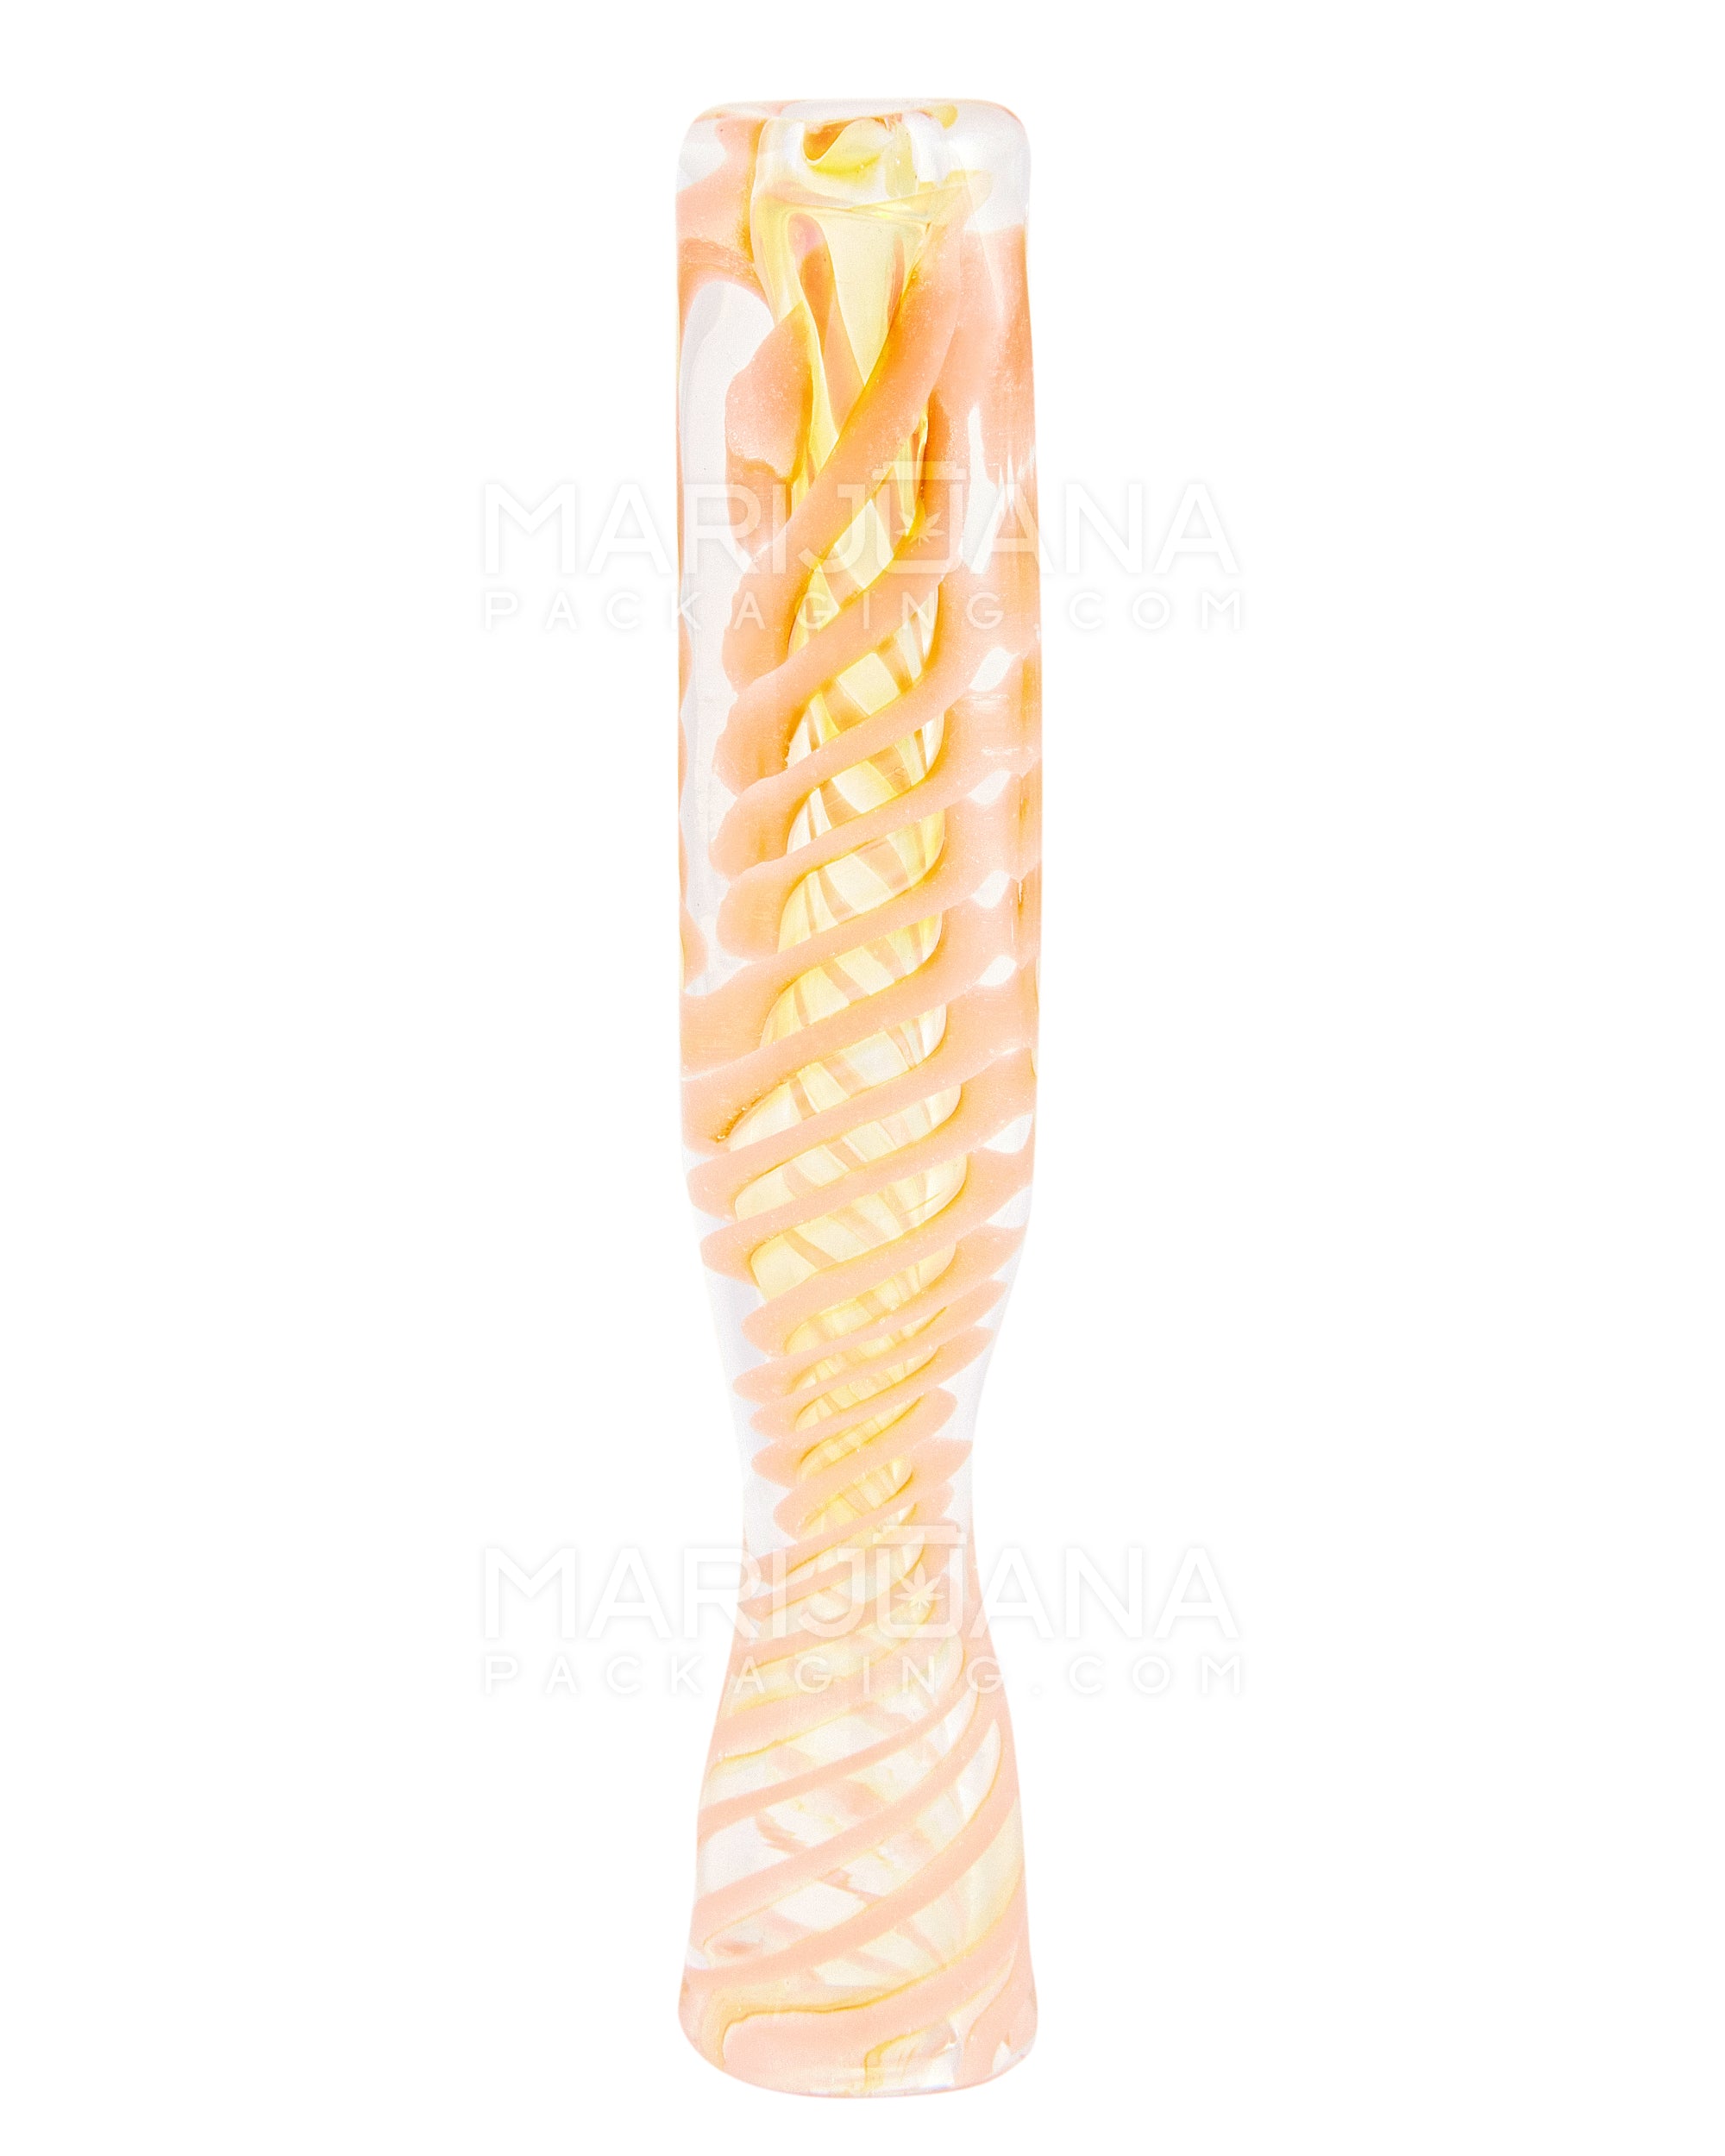 Spiral & Gold Fumed Chillum Hand Pipe | 3in Long - Glass - Assorted - 10